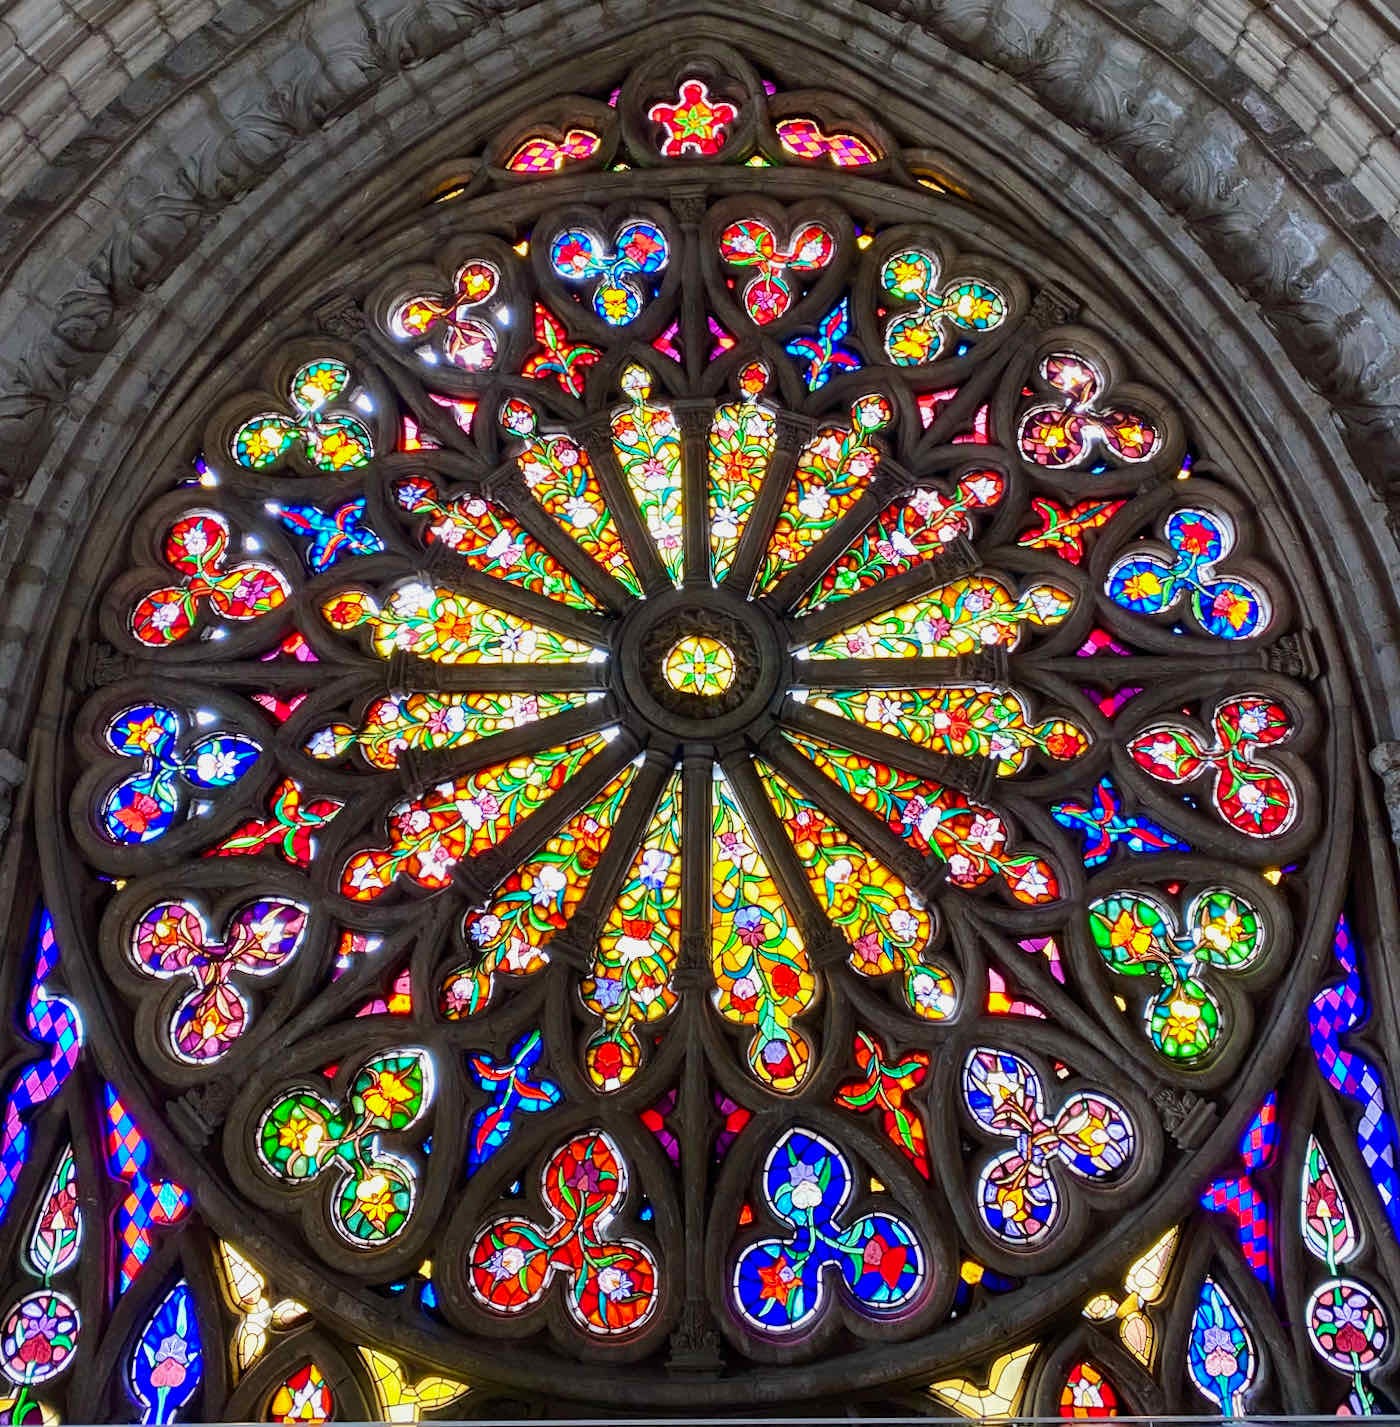 Rose window featuring orchids in various shades of yellow, red, green, blue, and orange